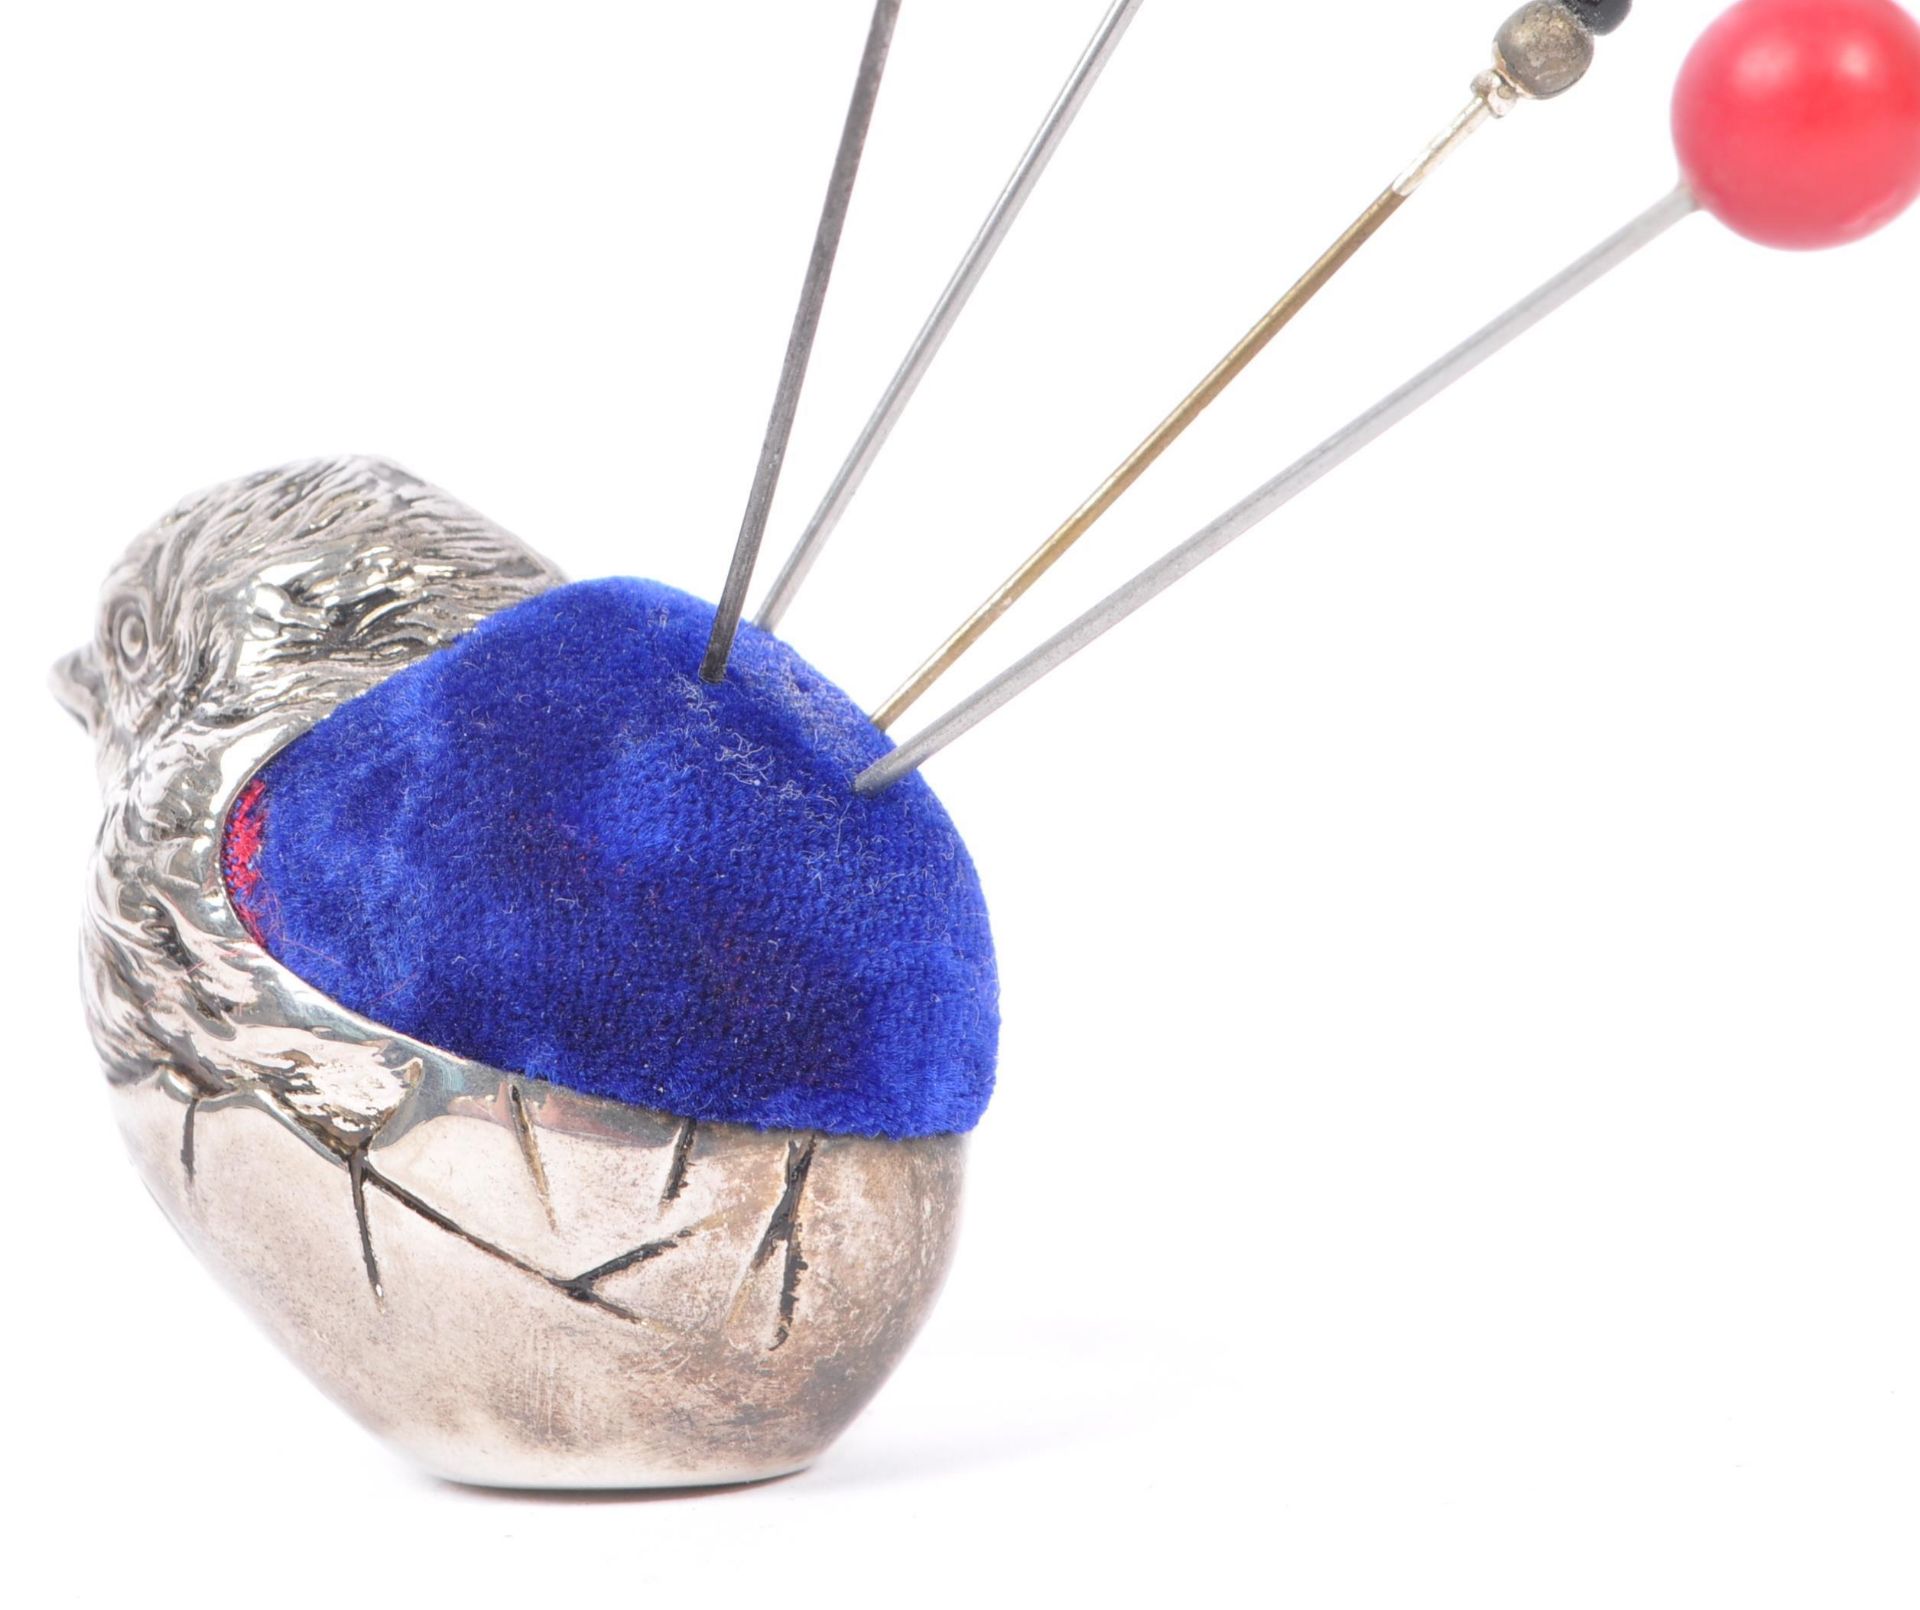 SILVER PLATED CHICK PIN CUSHION WITH HAT PINS - Image 5 of 5